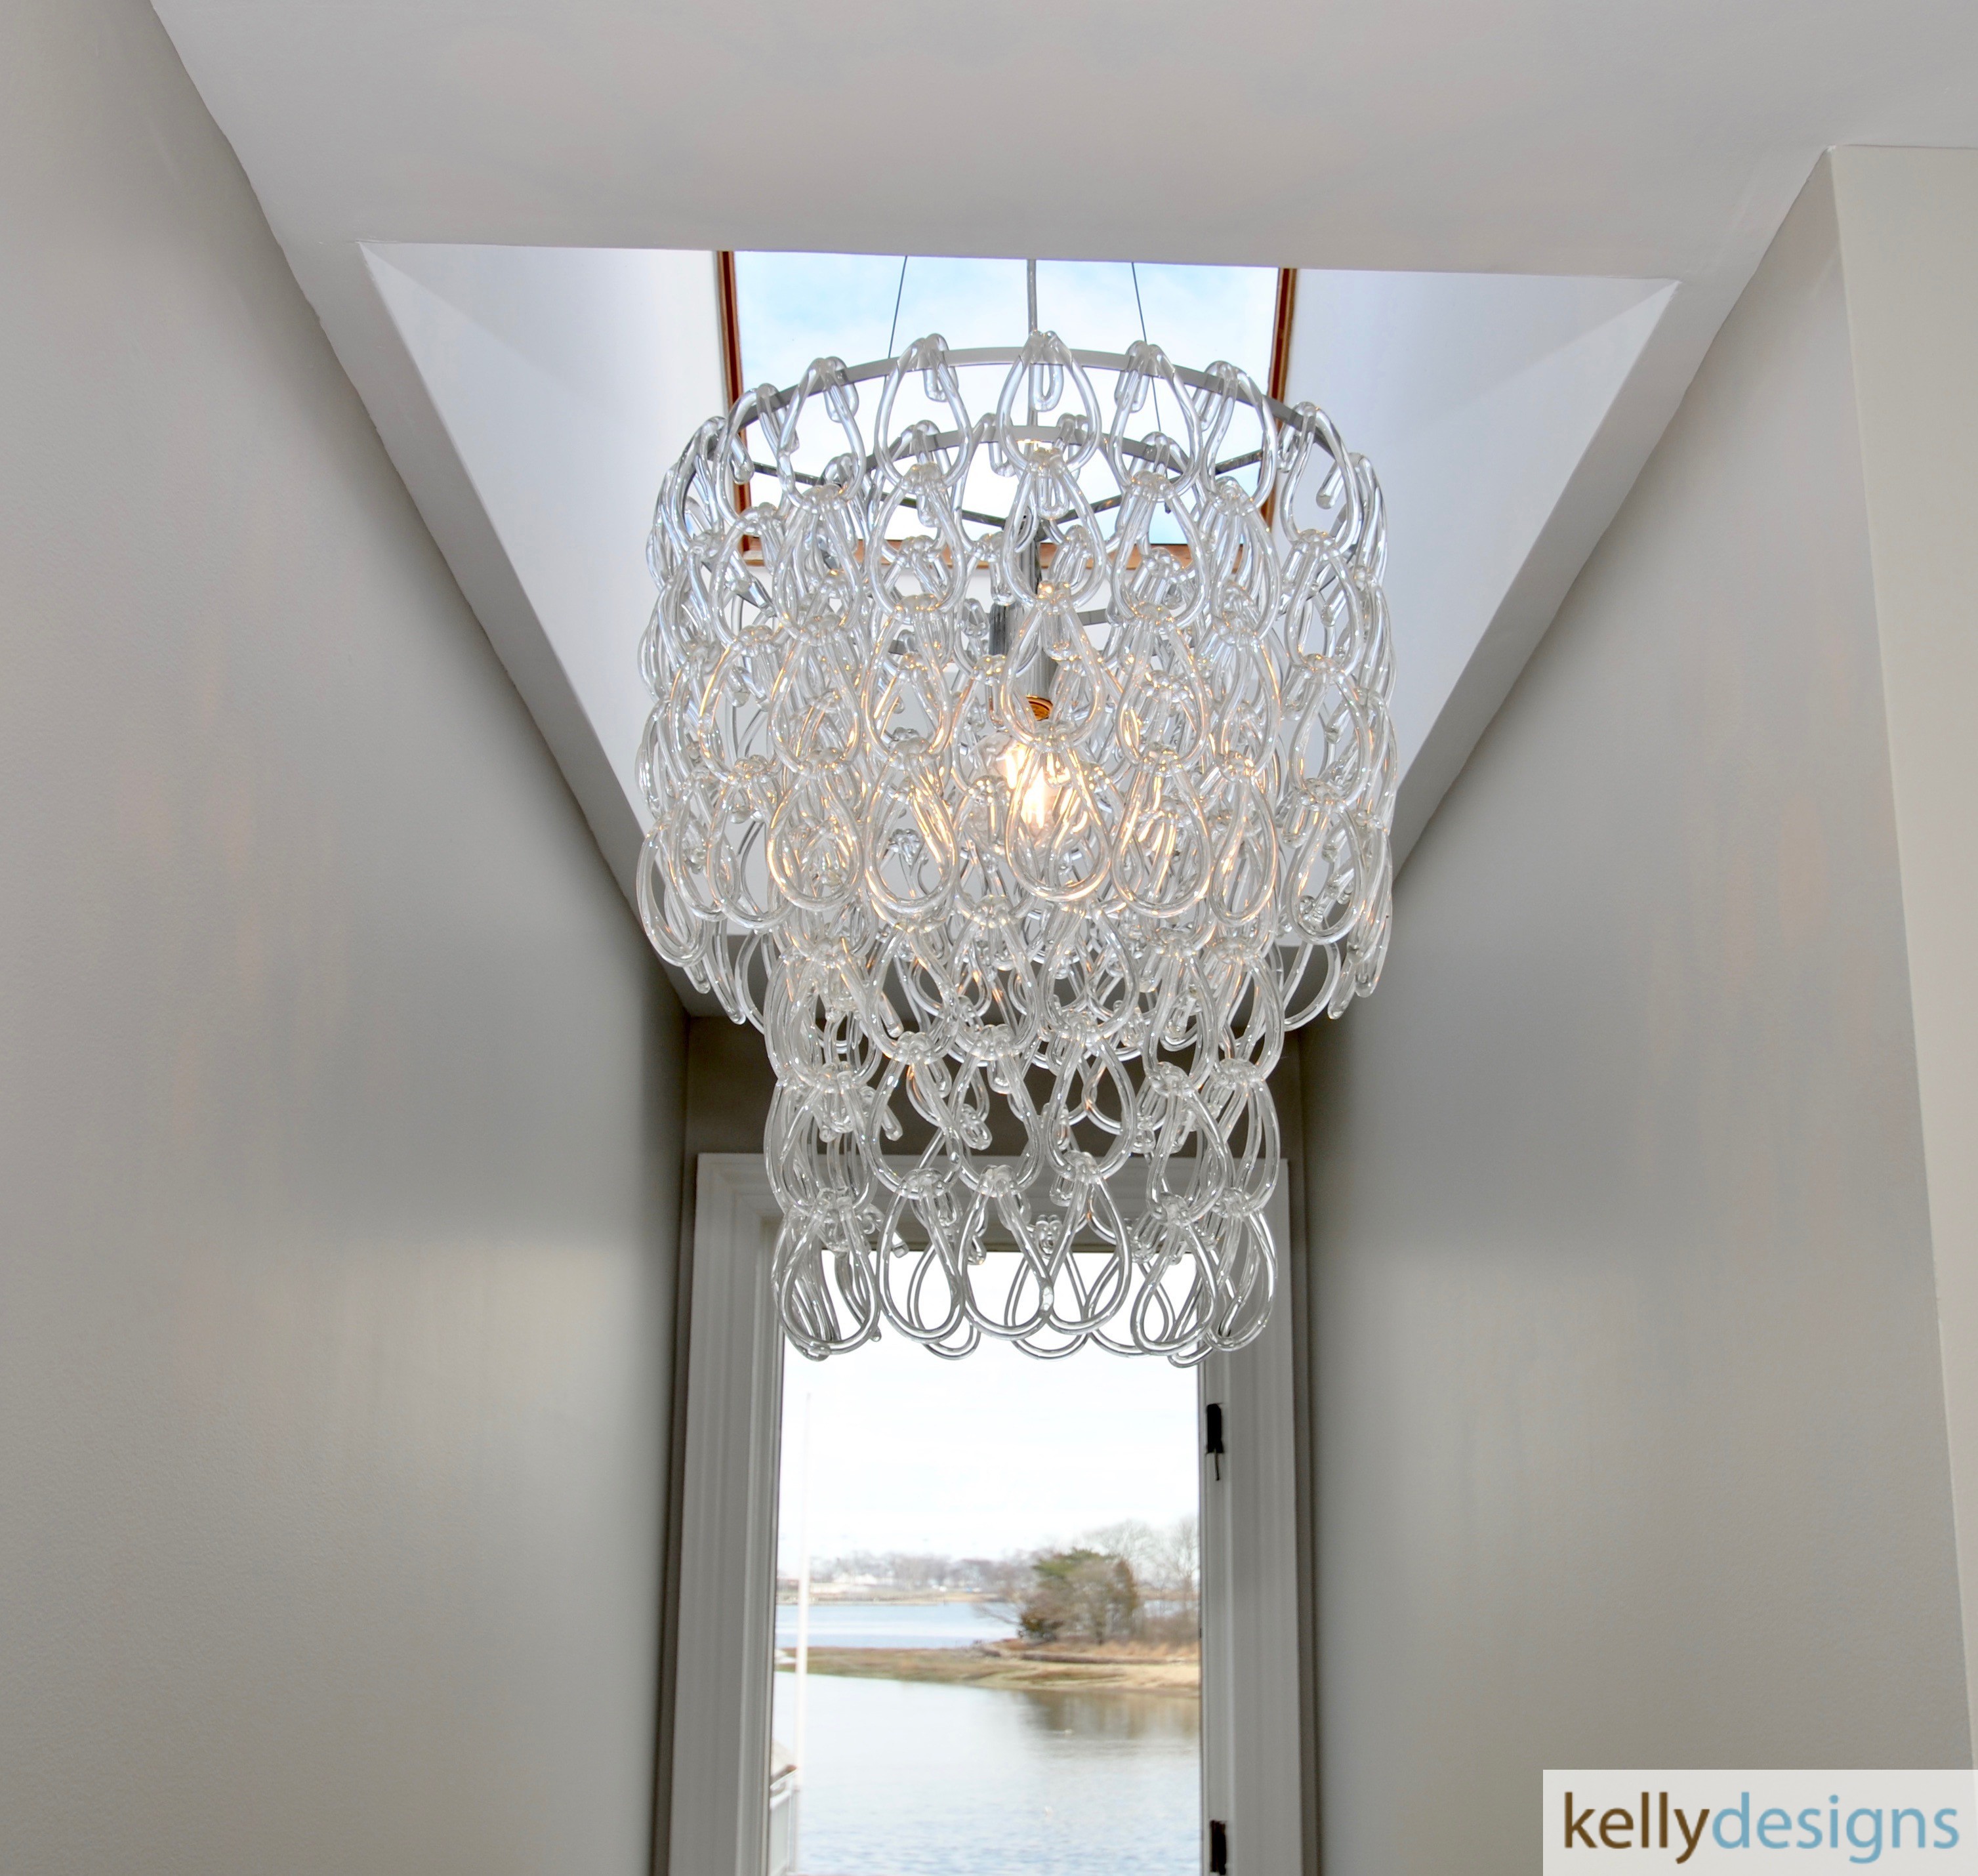 This stairway originally had a spotlight as the light fixture...this pretty glass loop chandelier adds to the pretty vista created out the window!